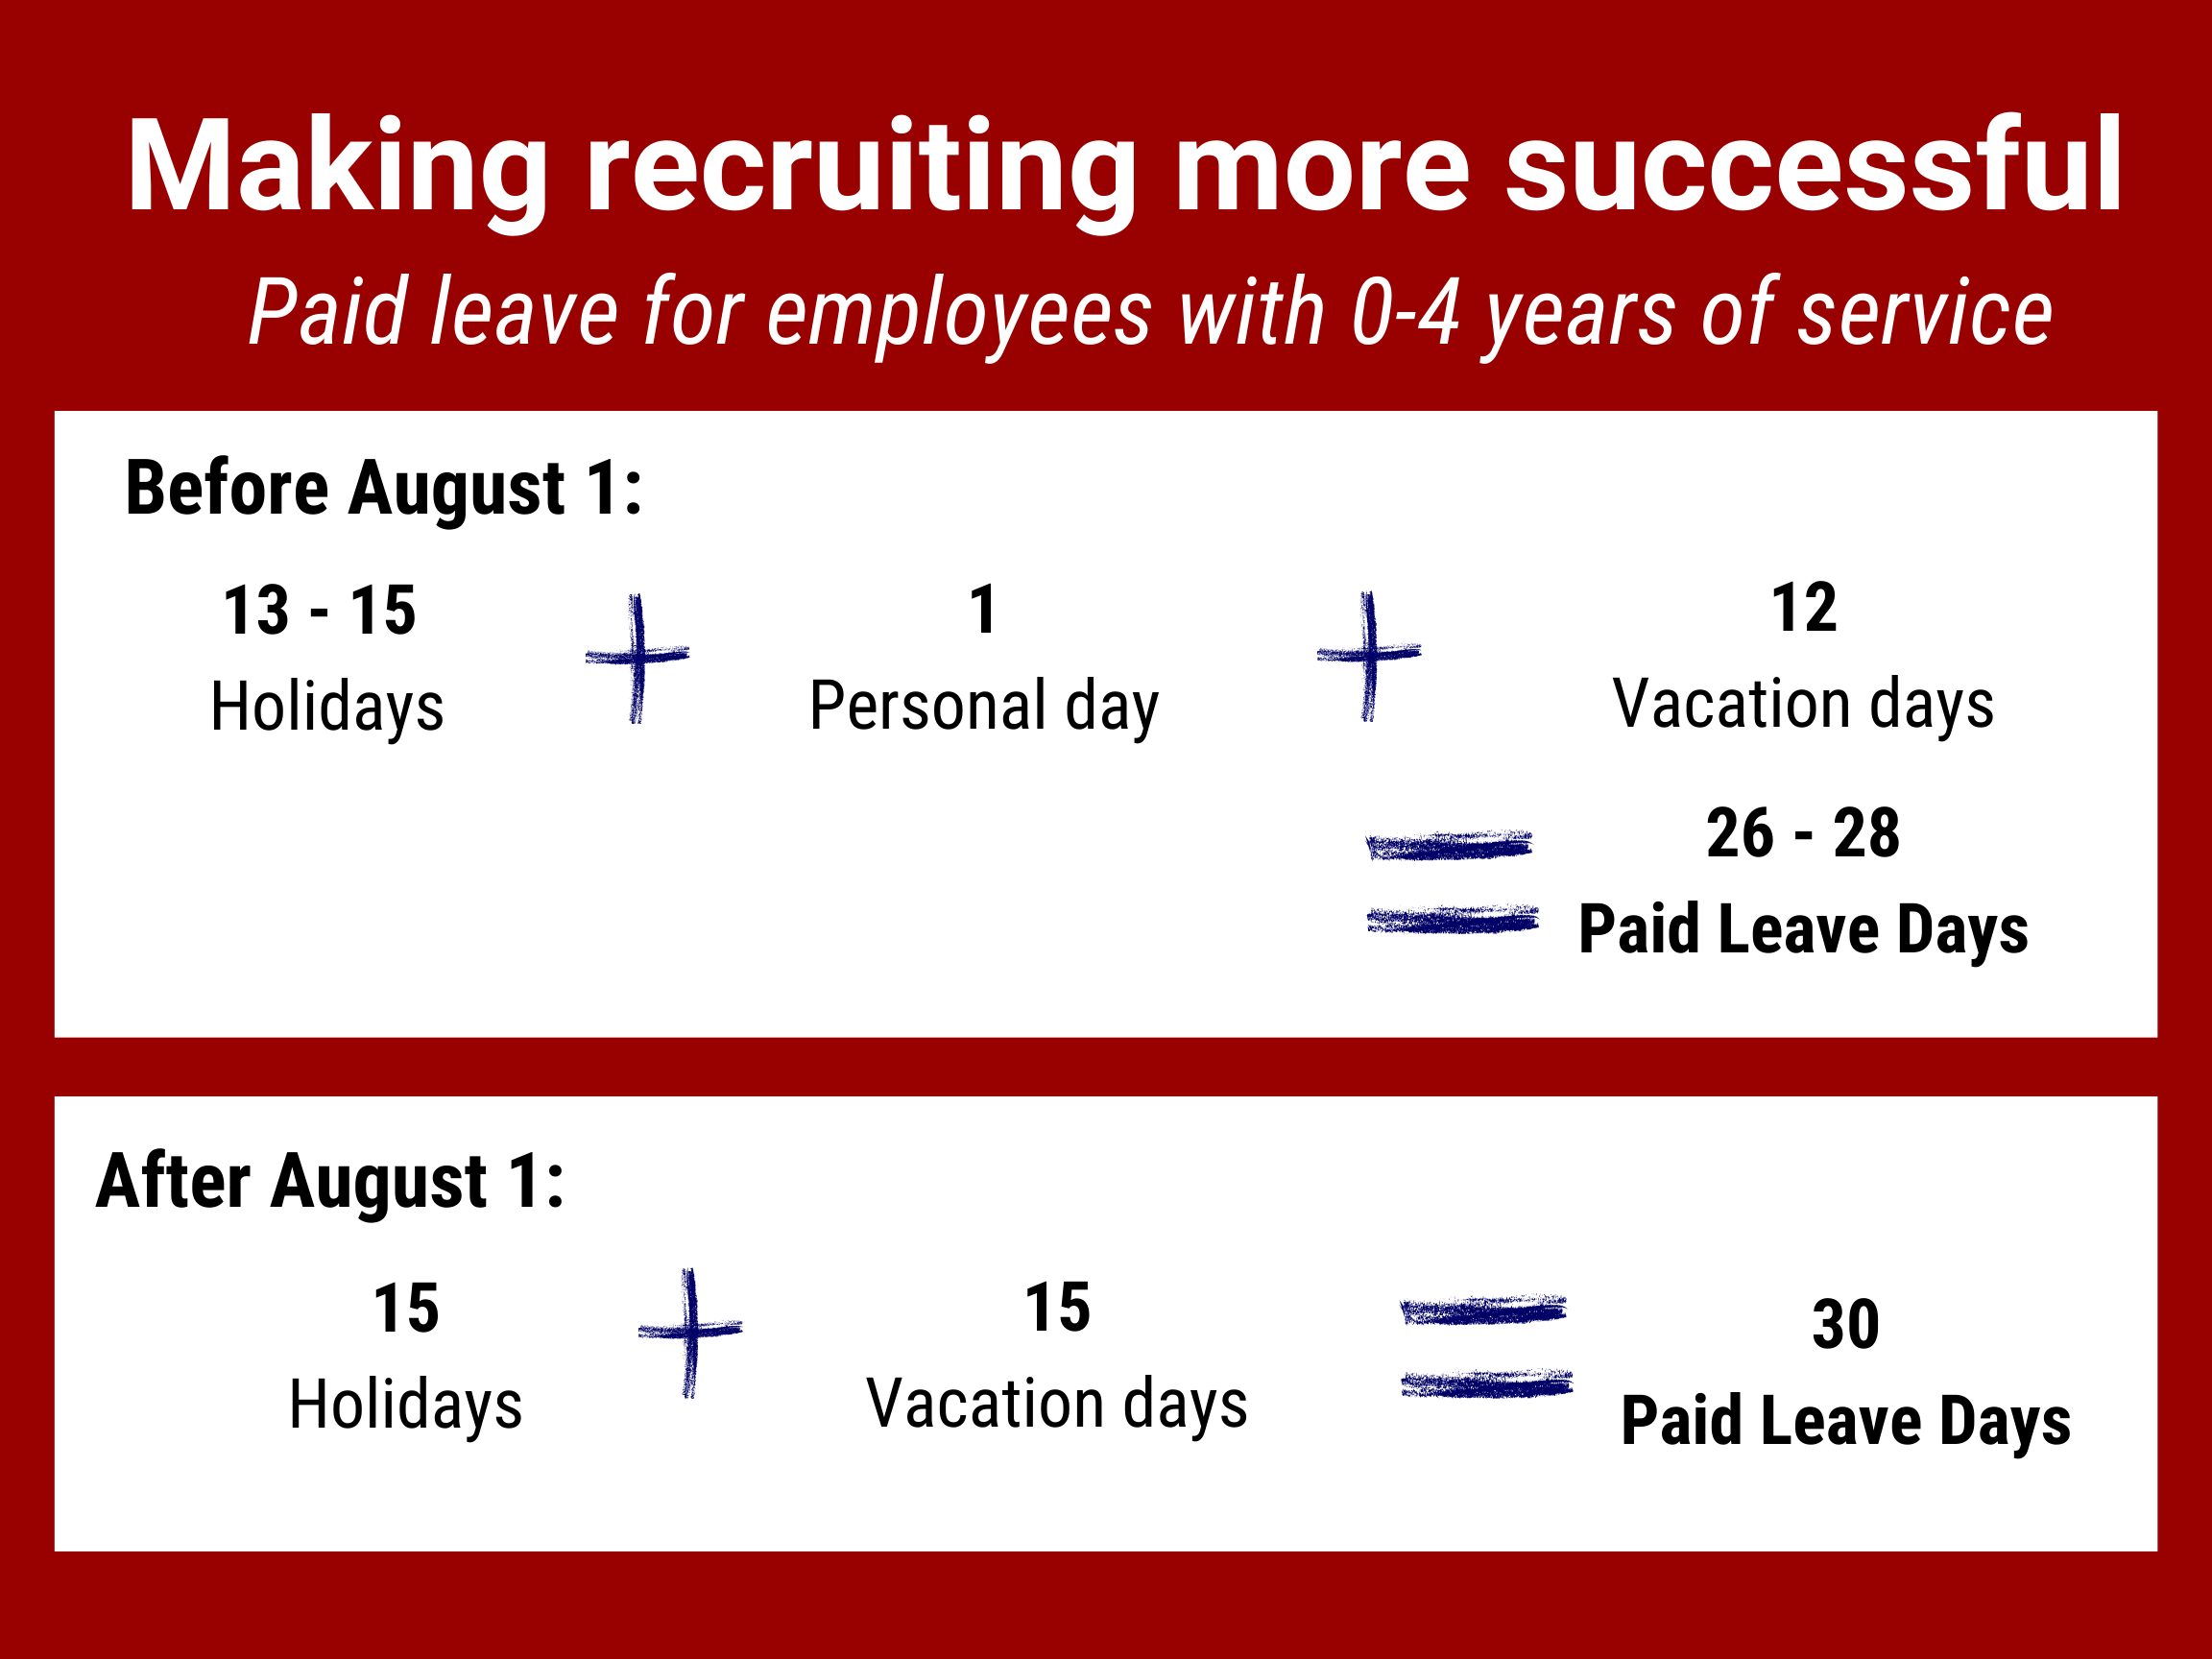 Employees with 0-4 years of experience now have 30 days of paid leave a year instead of 26.5 - 28.5 days.